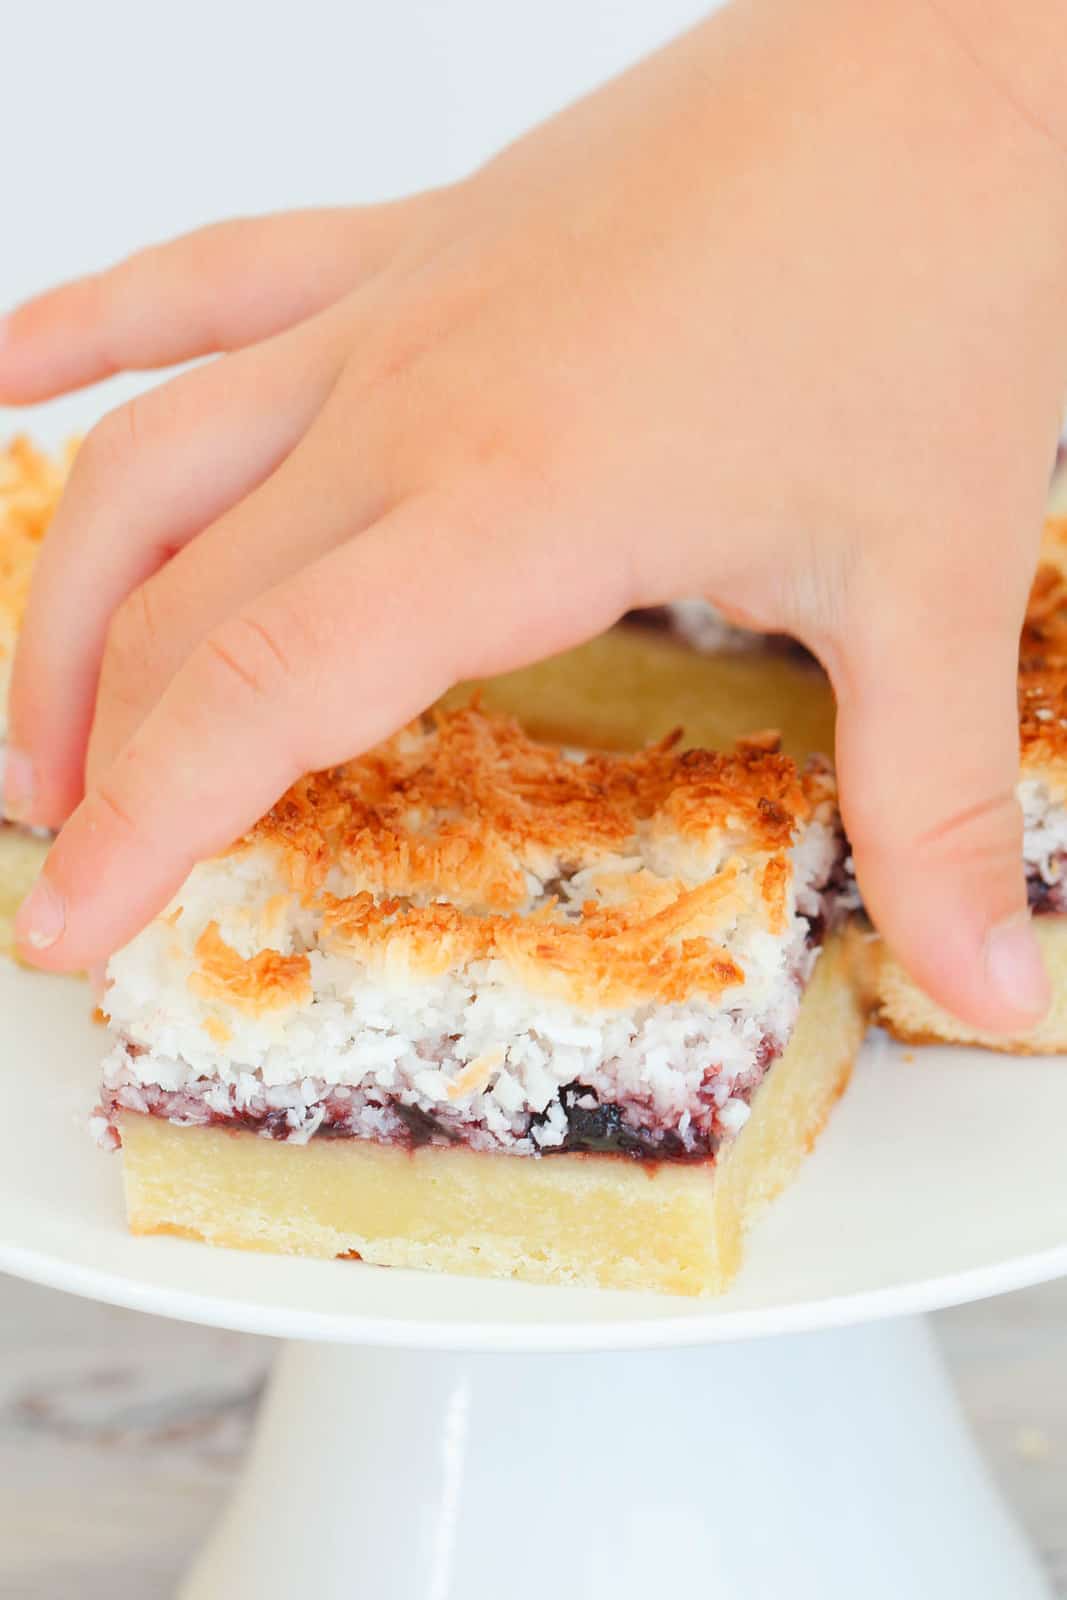 A child's hand picking up a piece of Raspberry Coconut Slice.